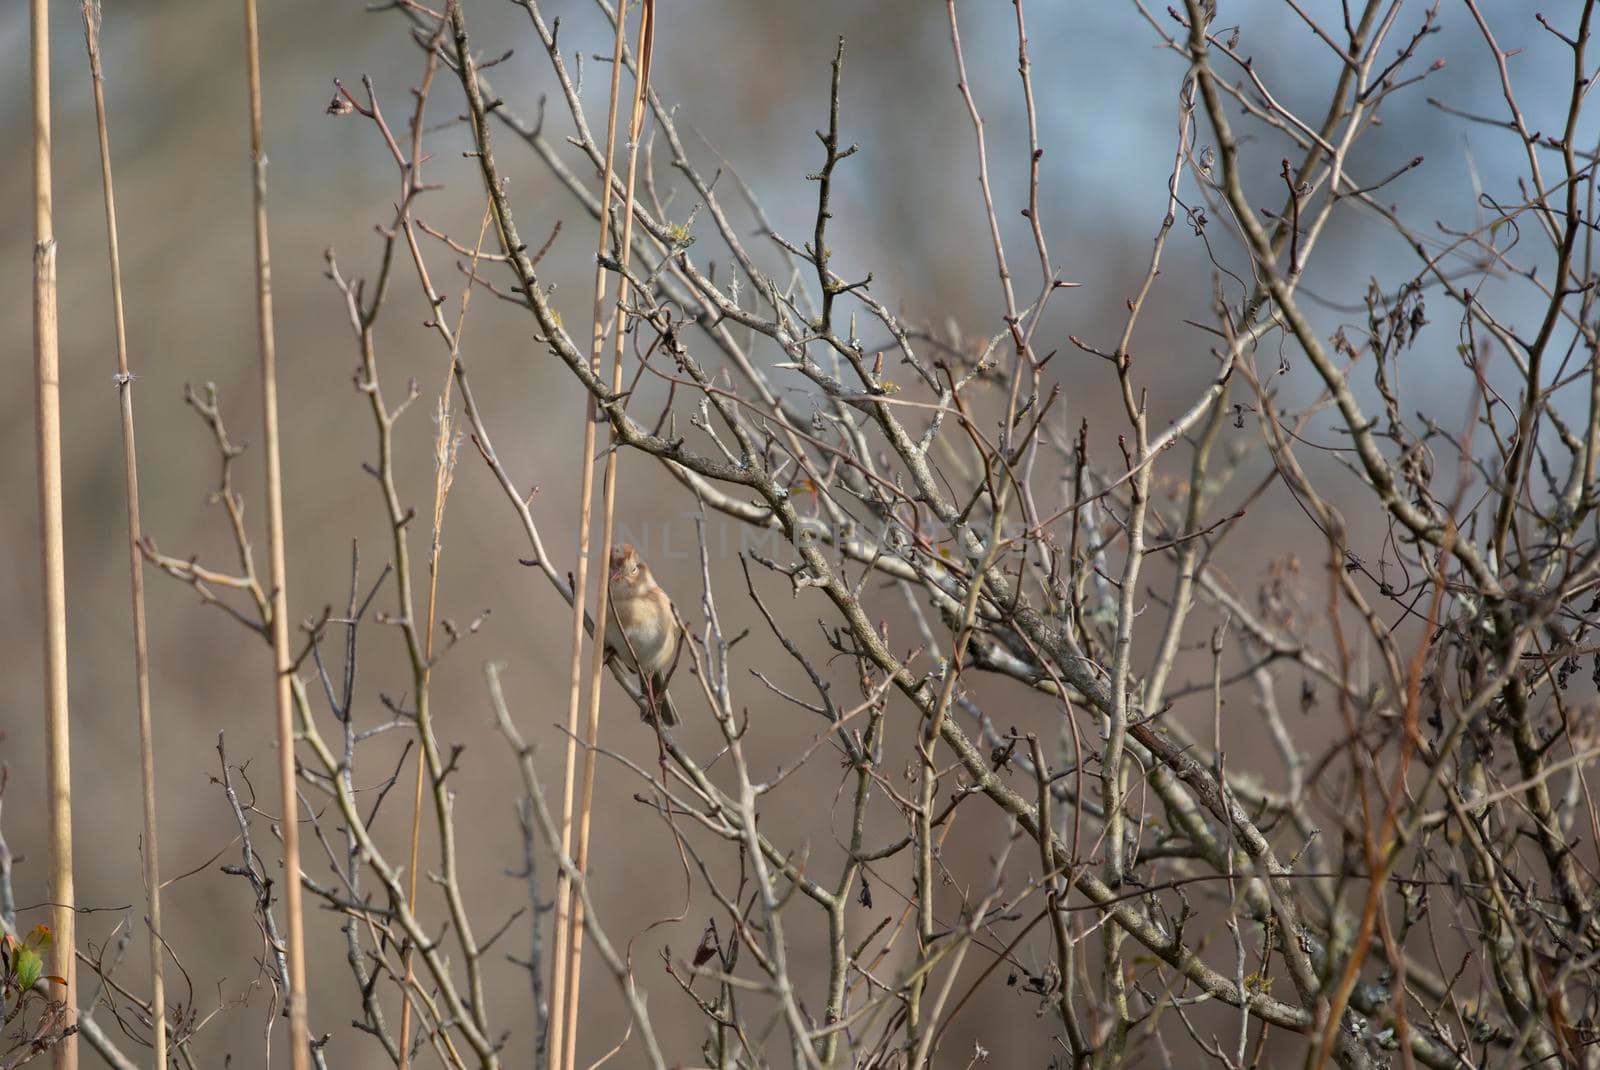 Field sparrow (Spizella pusilla) perched on a thin reed in a field, snacking